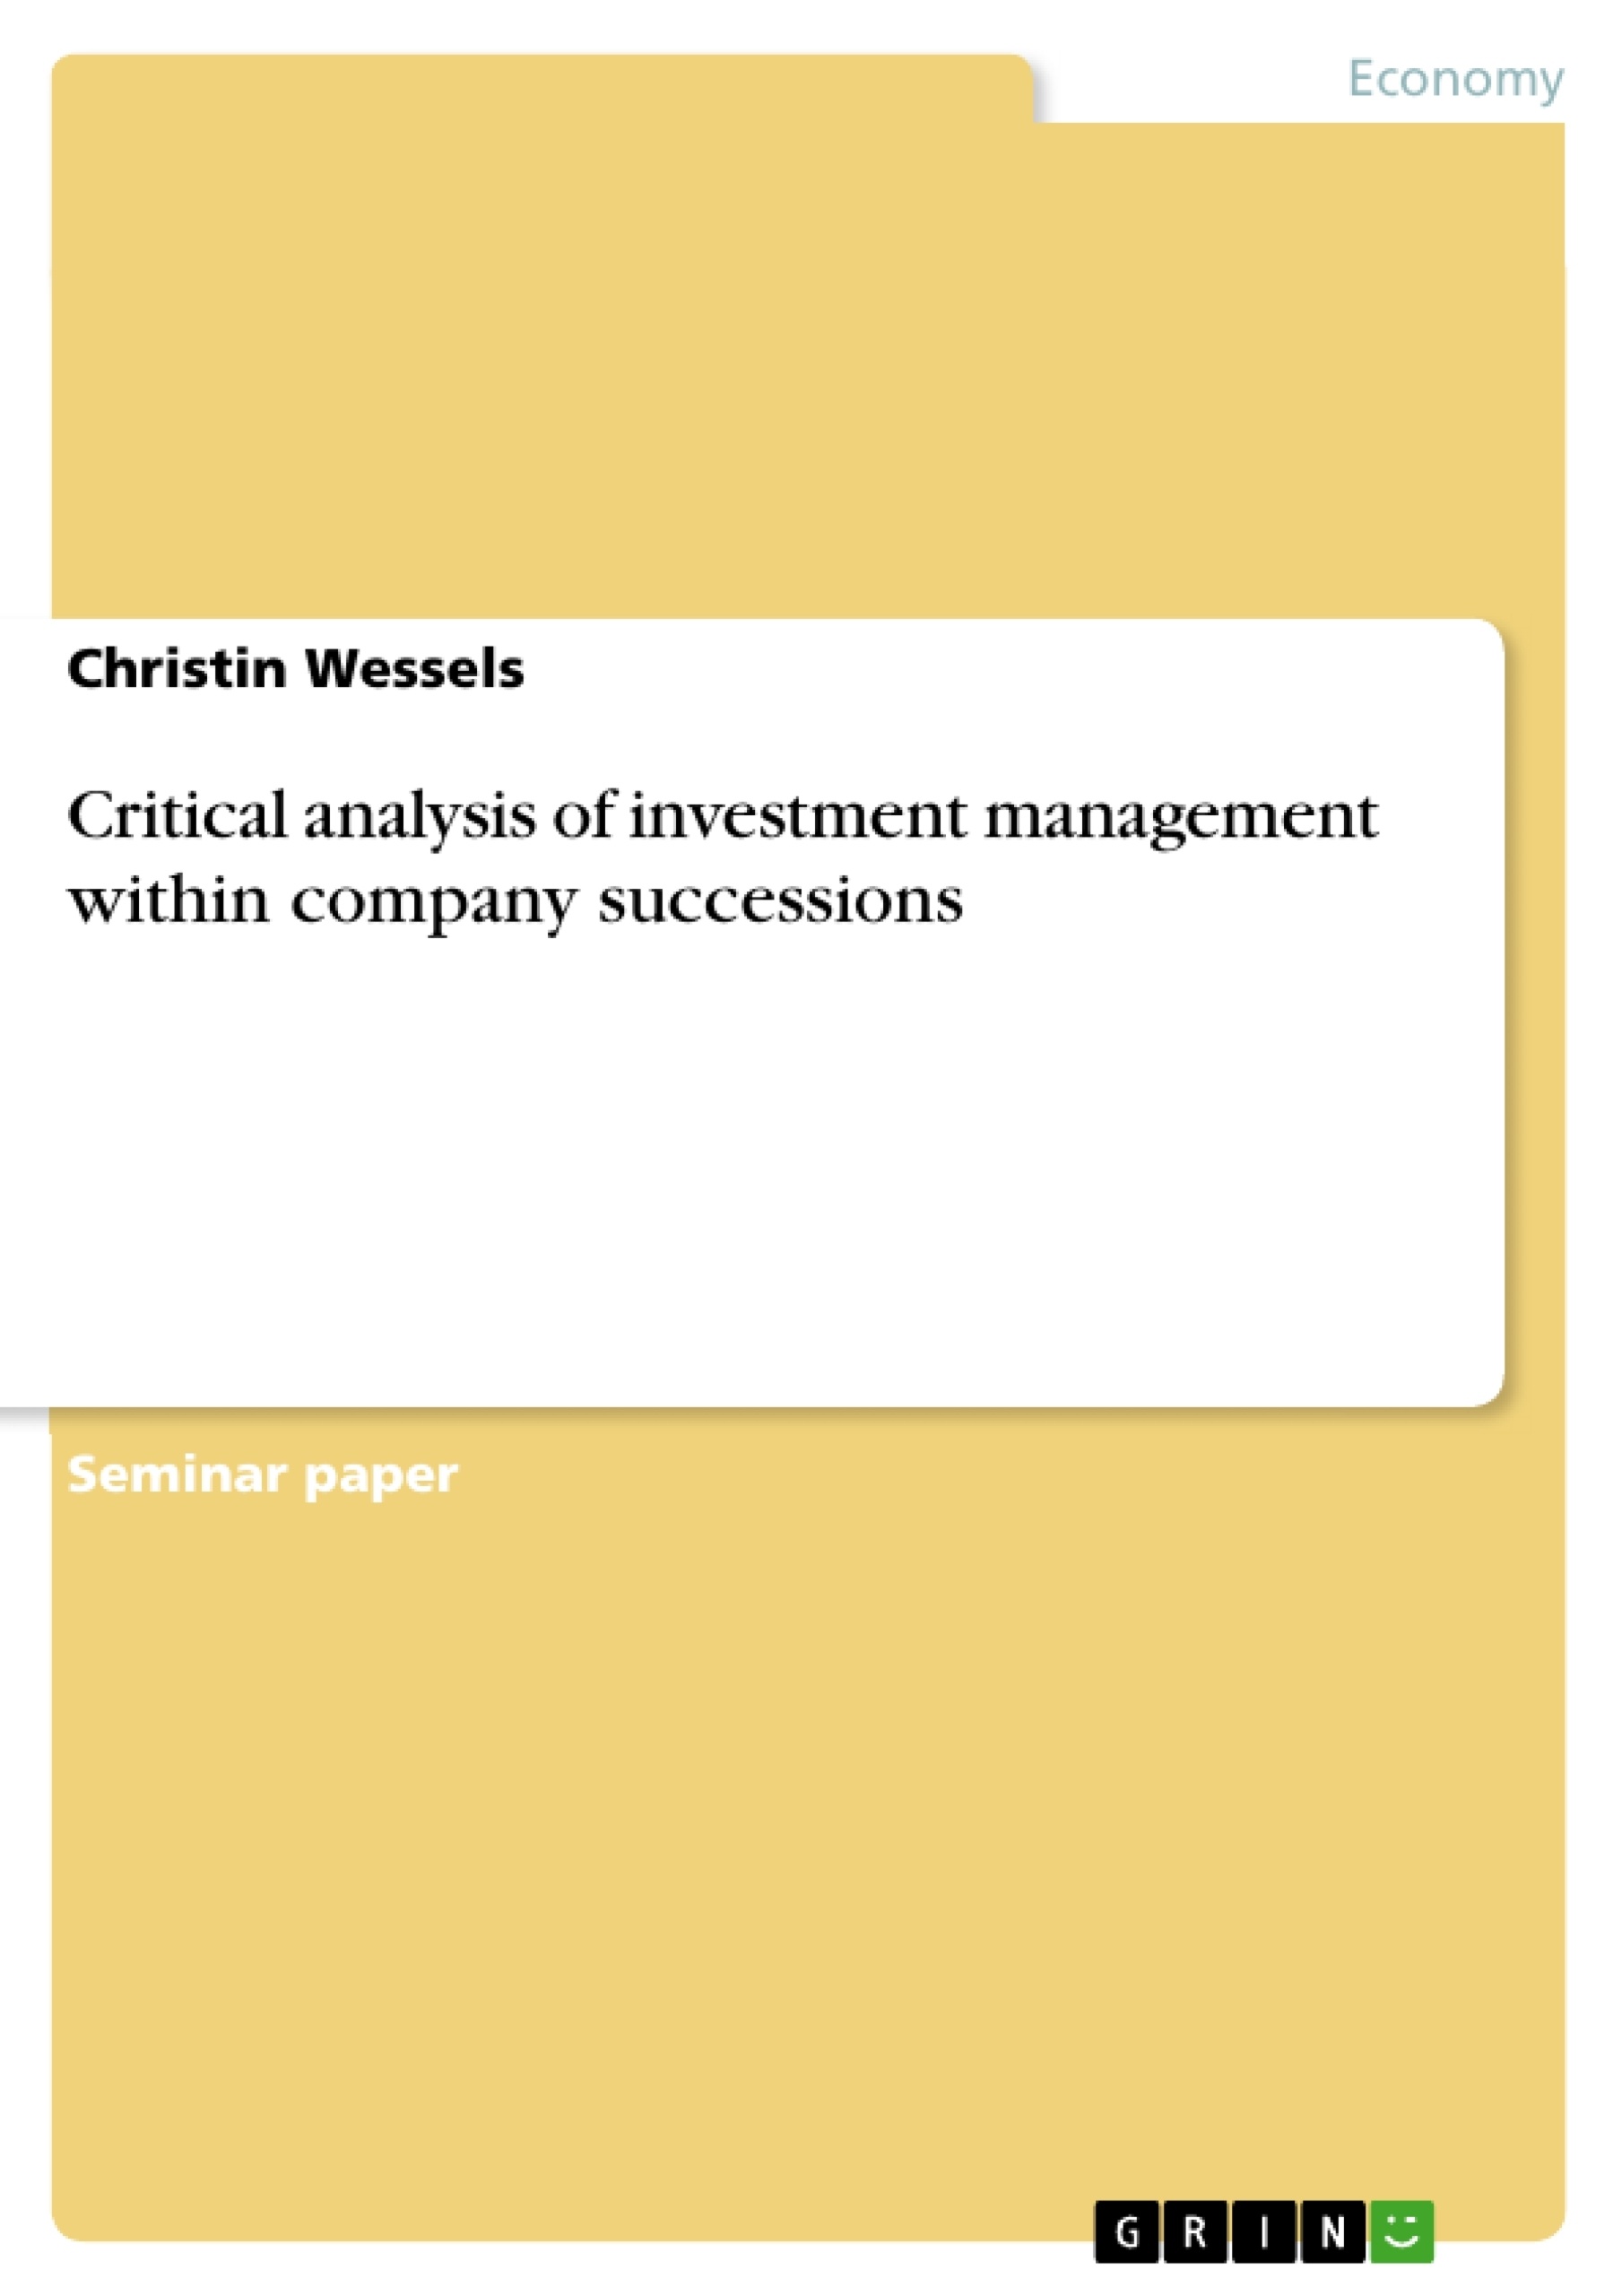 Title: Critical analysis of investment management within company successions